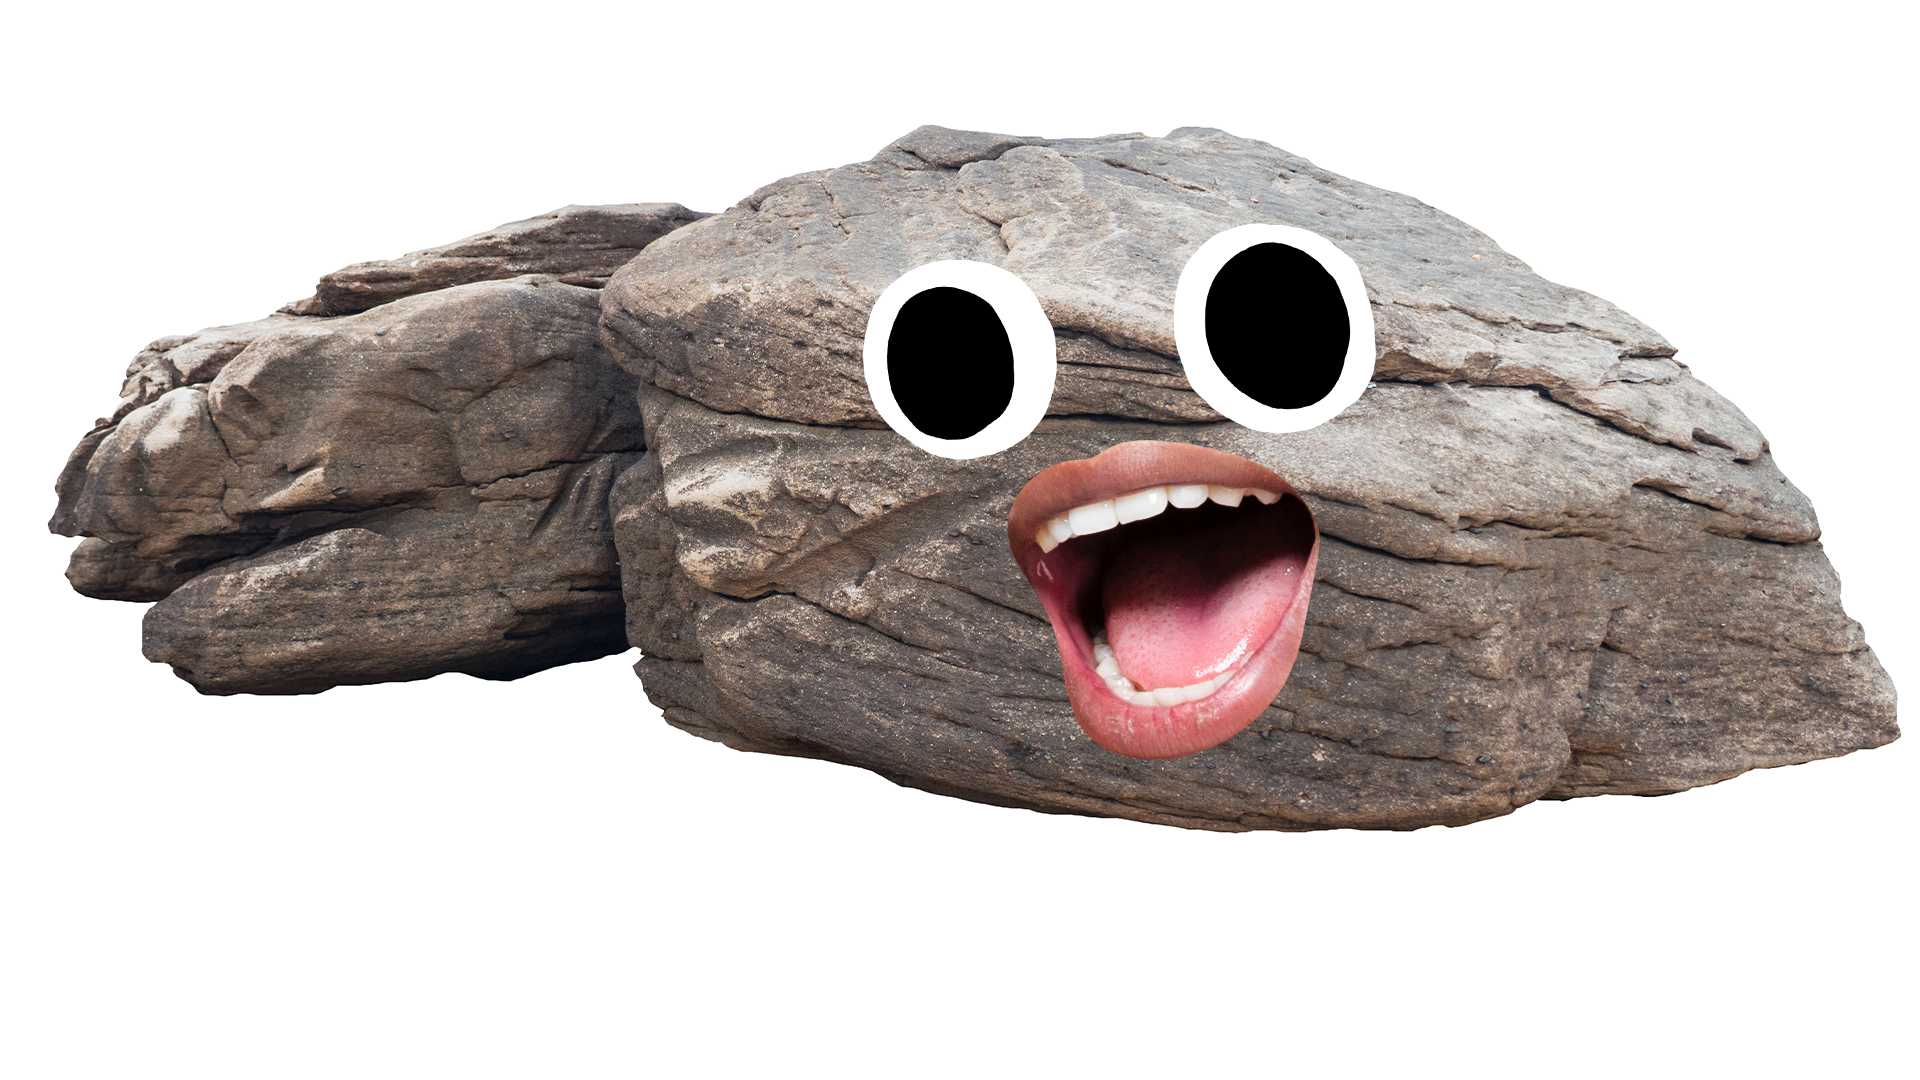 Rock with a goofy face on white background